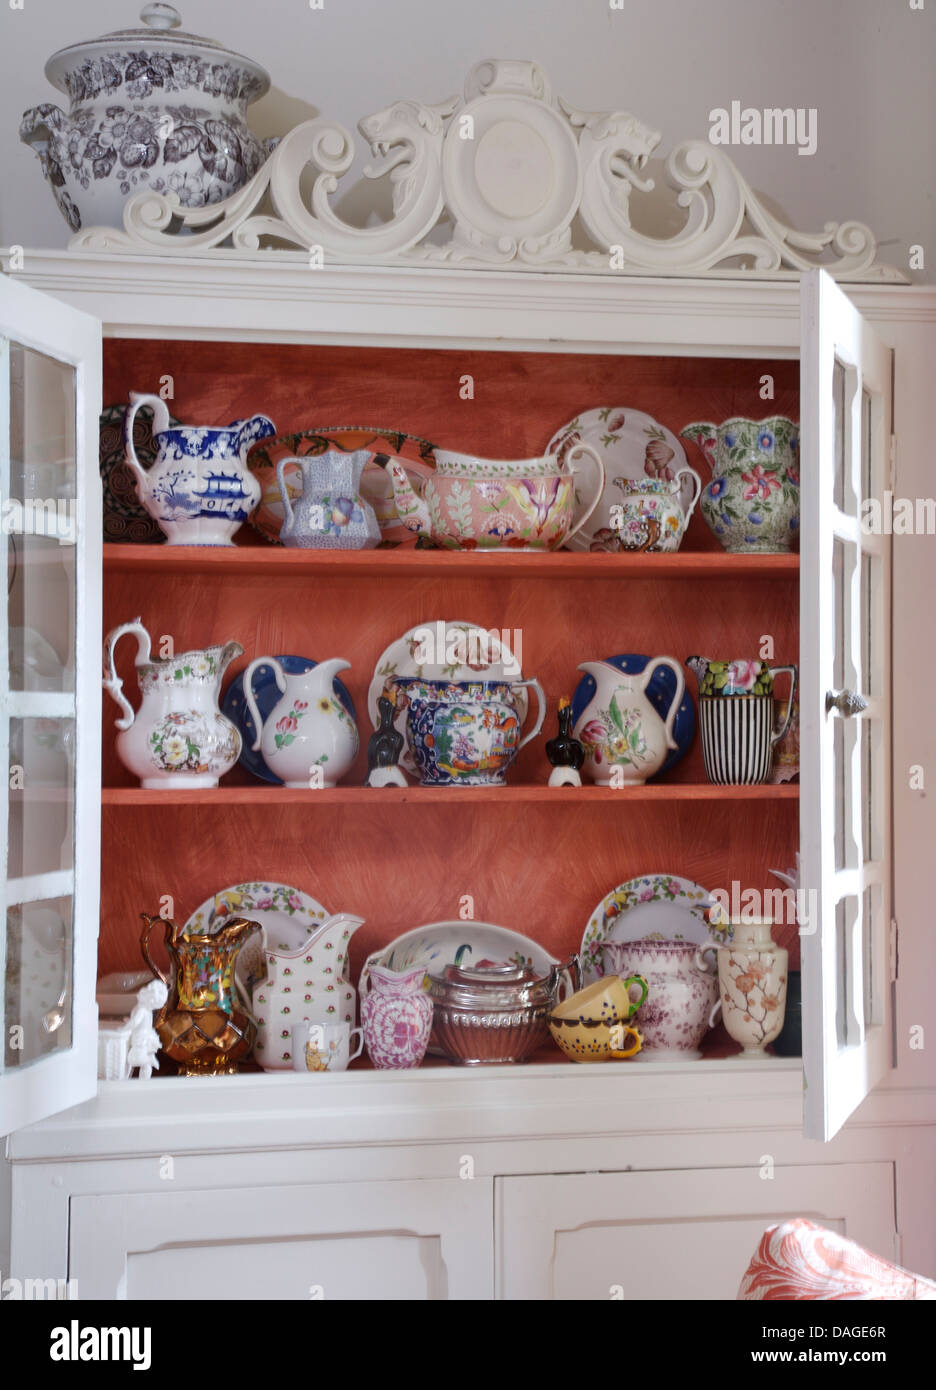 Close Up Of White Painted Dresser With Collection Of Antique Jugs